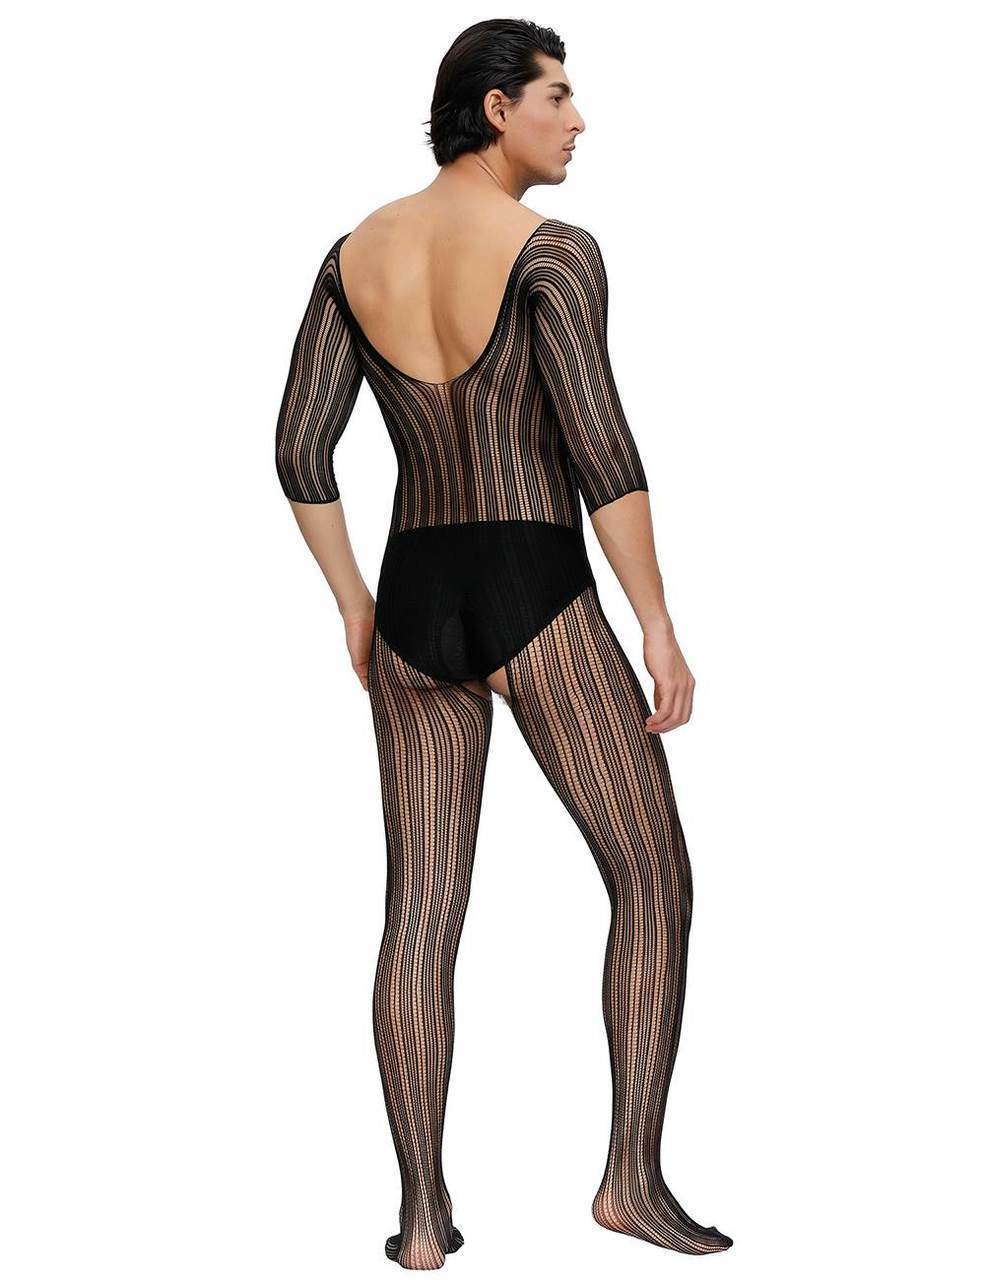 Mens Stretch Pinstripe Fishnet Bodystocking with Sleeves